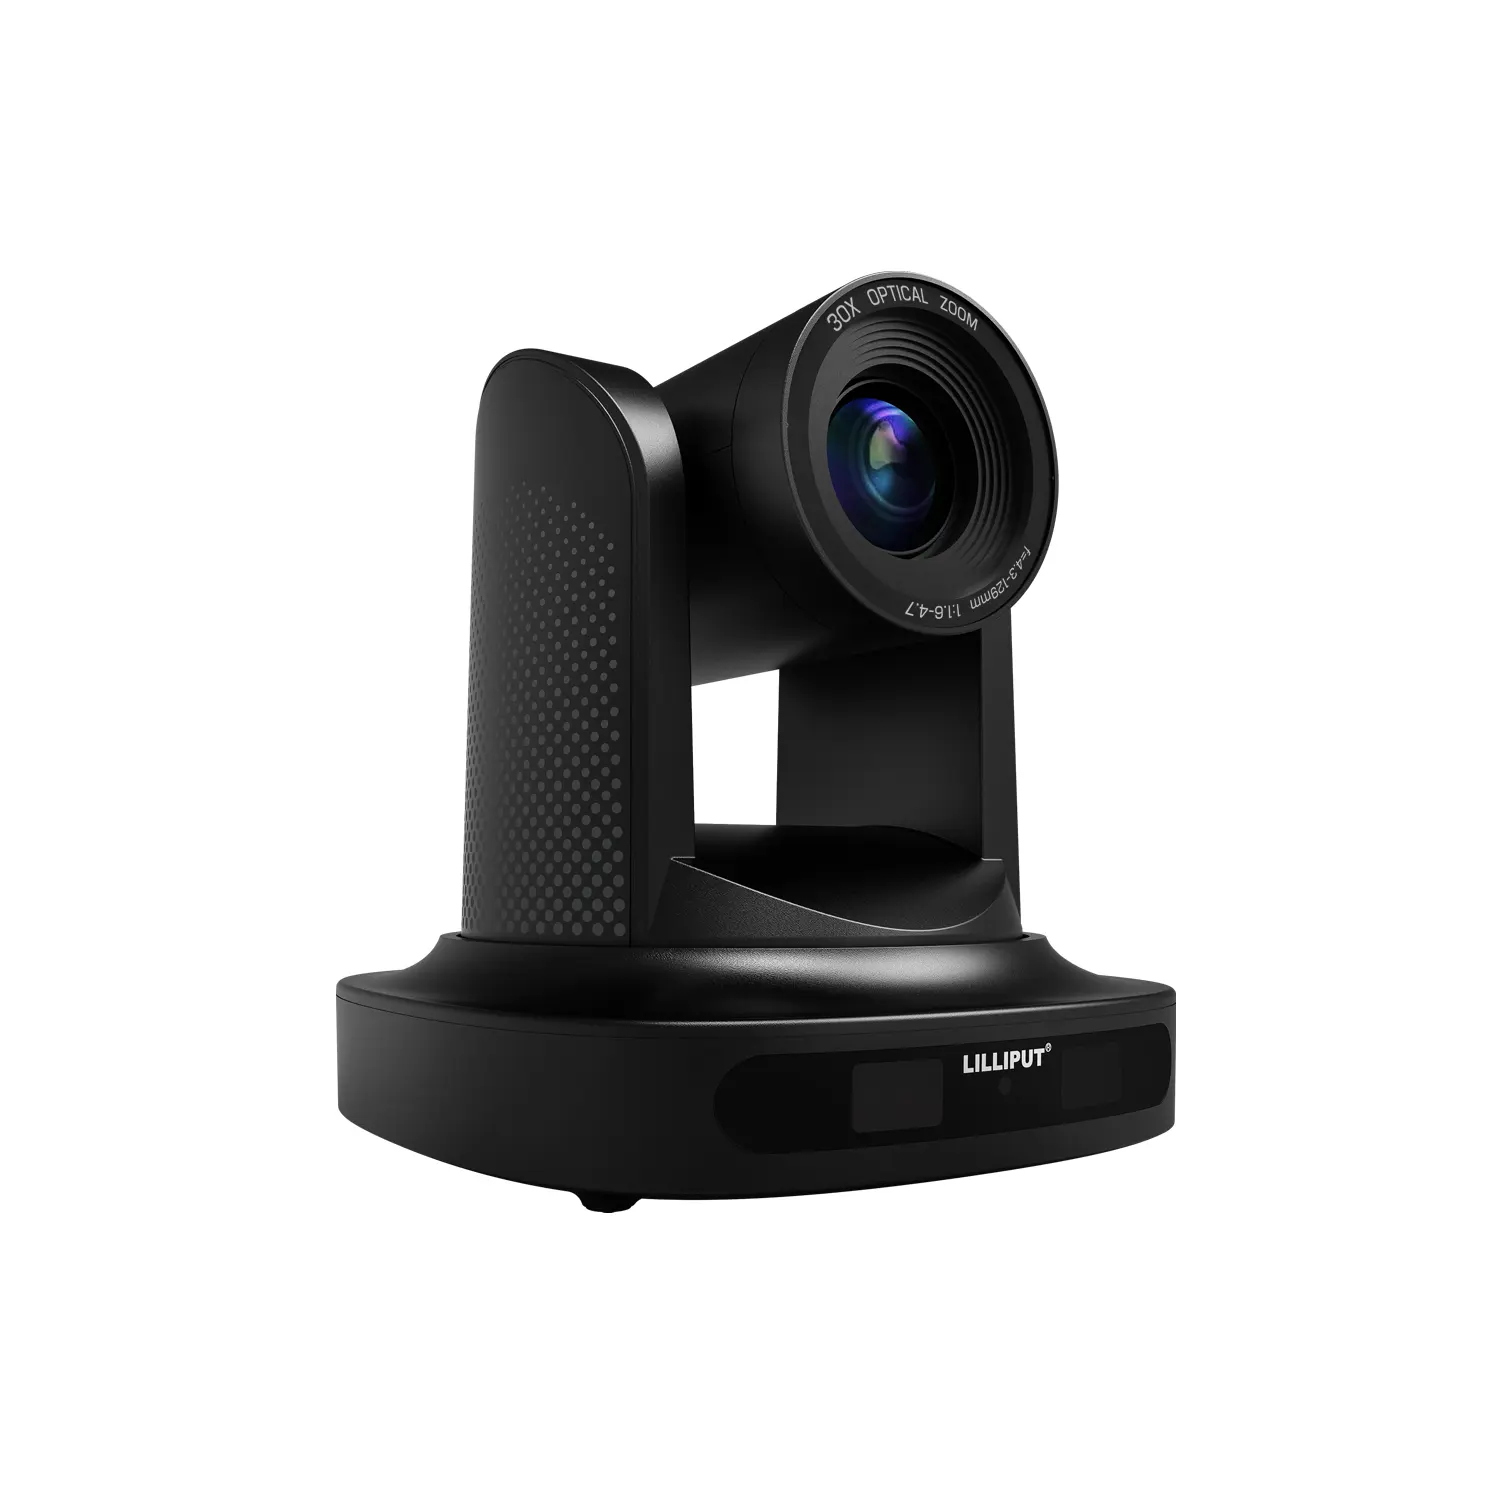 LILLIPUT PTZ camera 30x SDI HDMI IP camera PoE and NDI camera for live broadcast and video conference system and live streaming